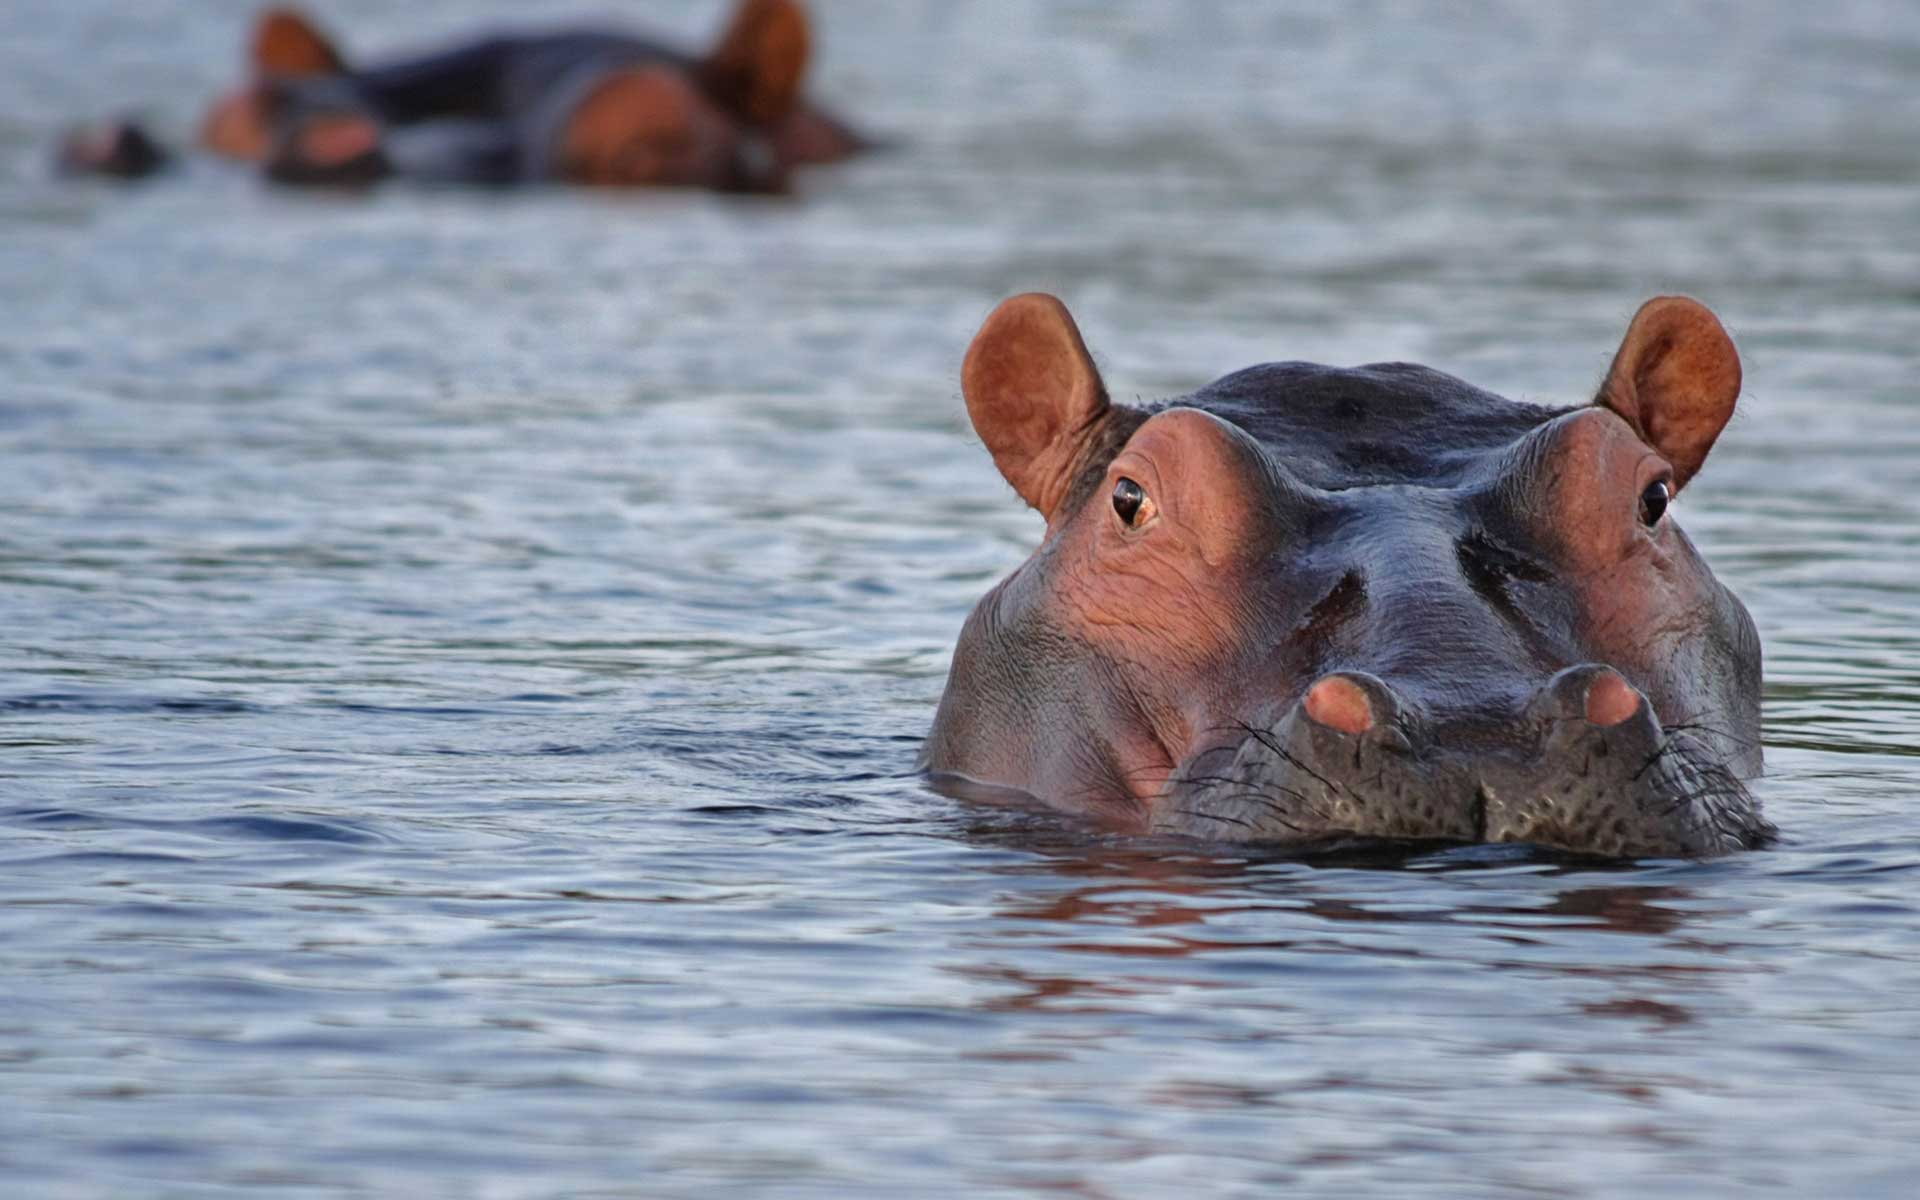 A hippopotamus with its head and back partially above water in a river or lake, surrounded by lush green vegetation.